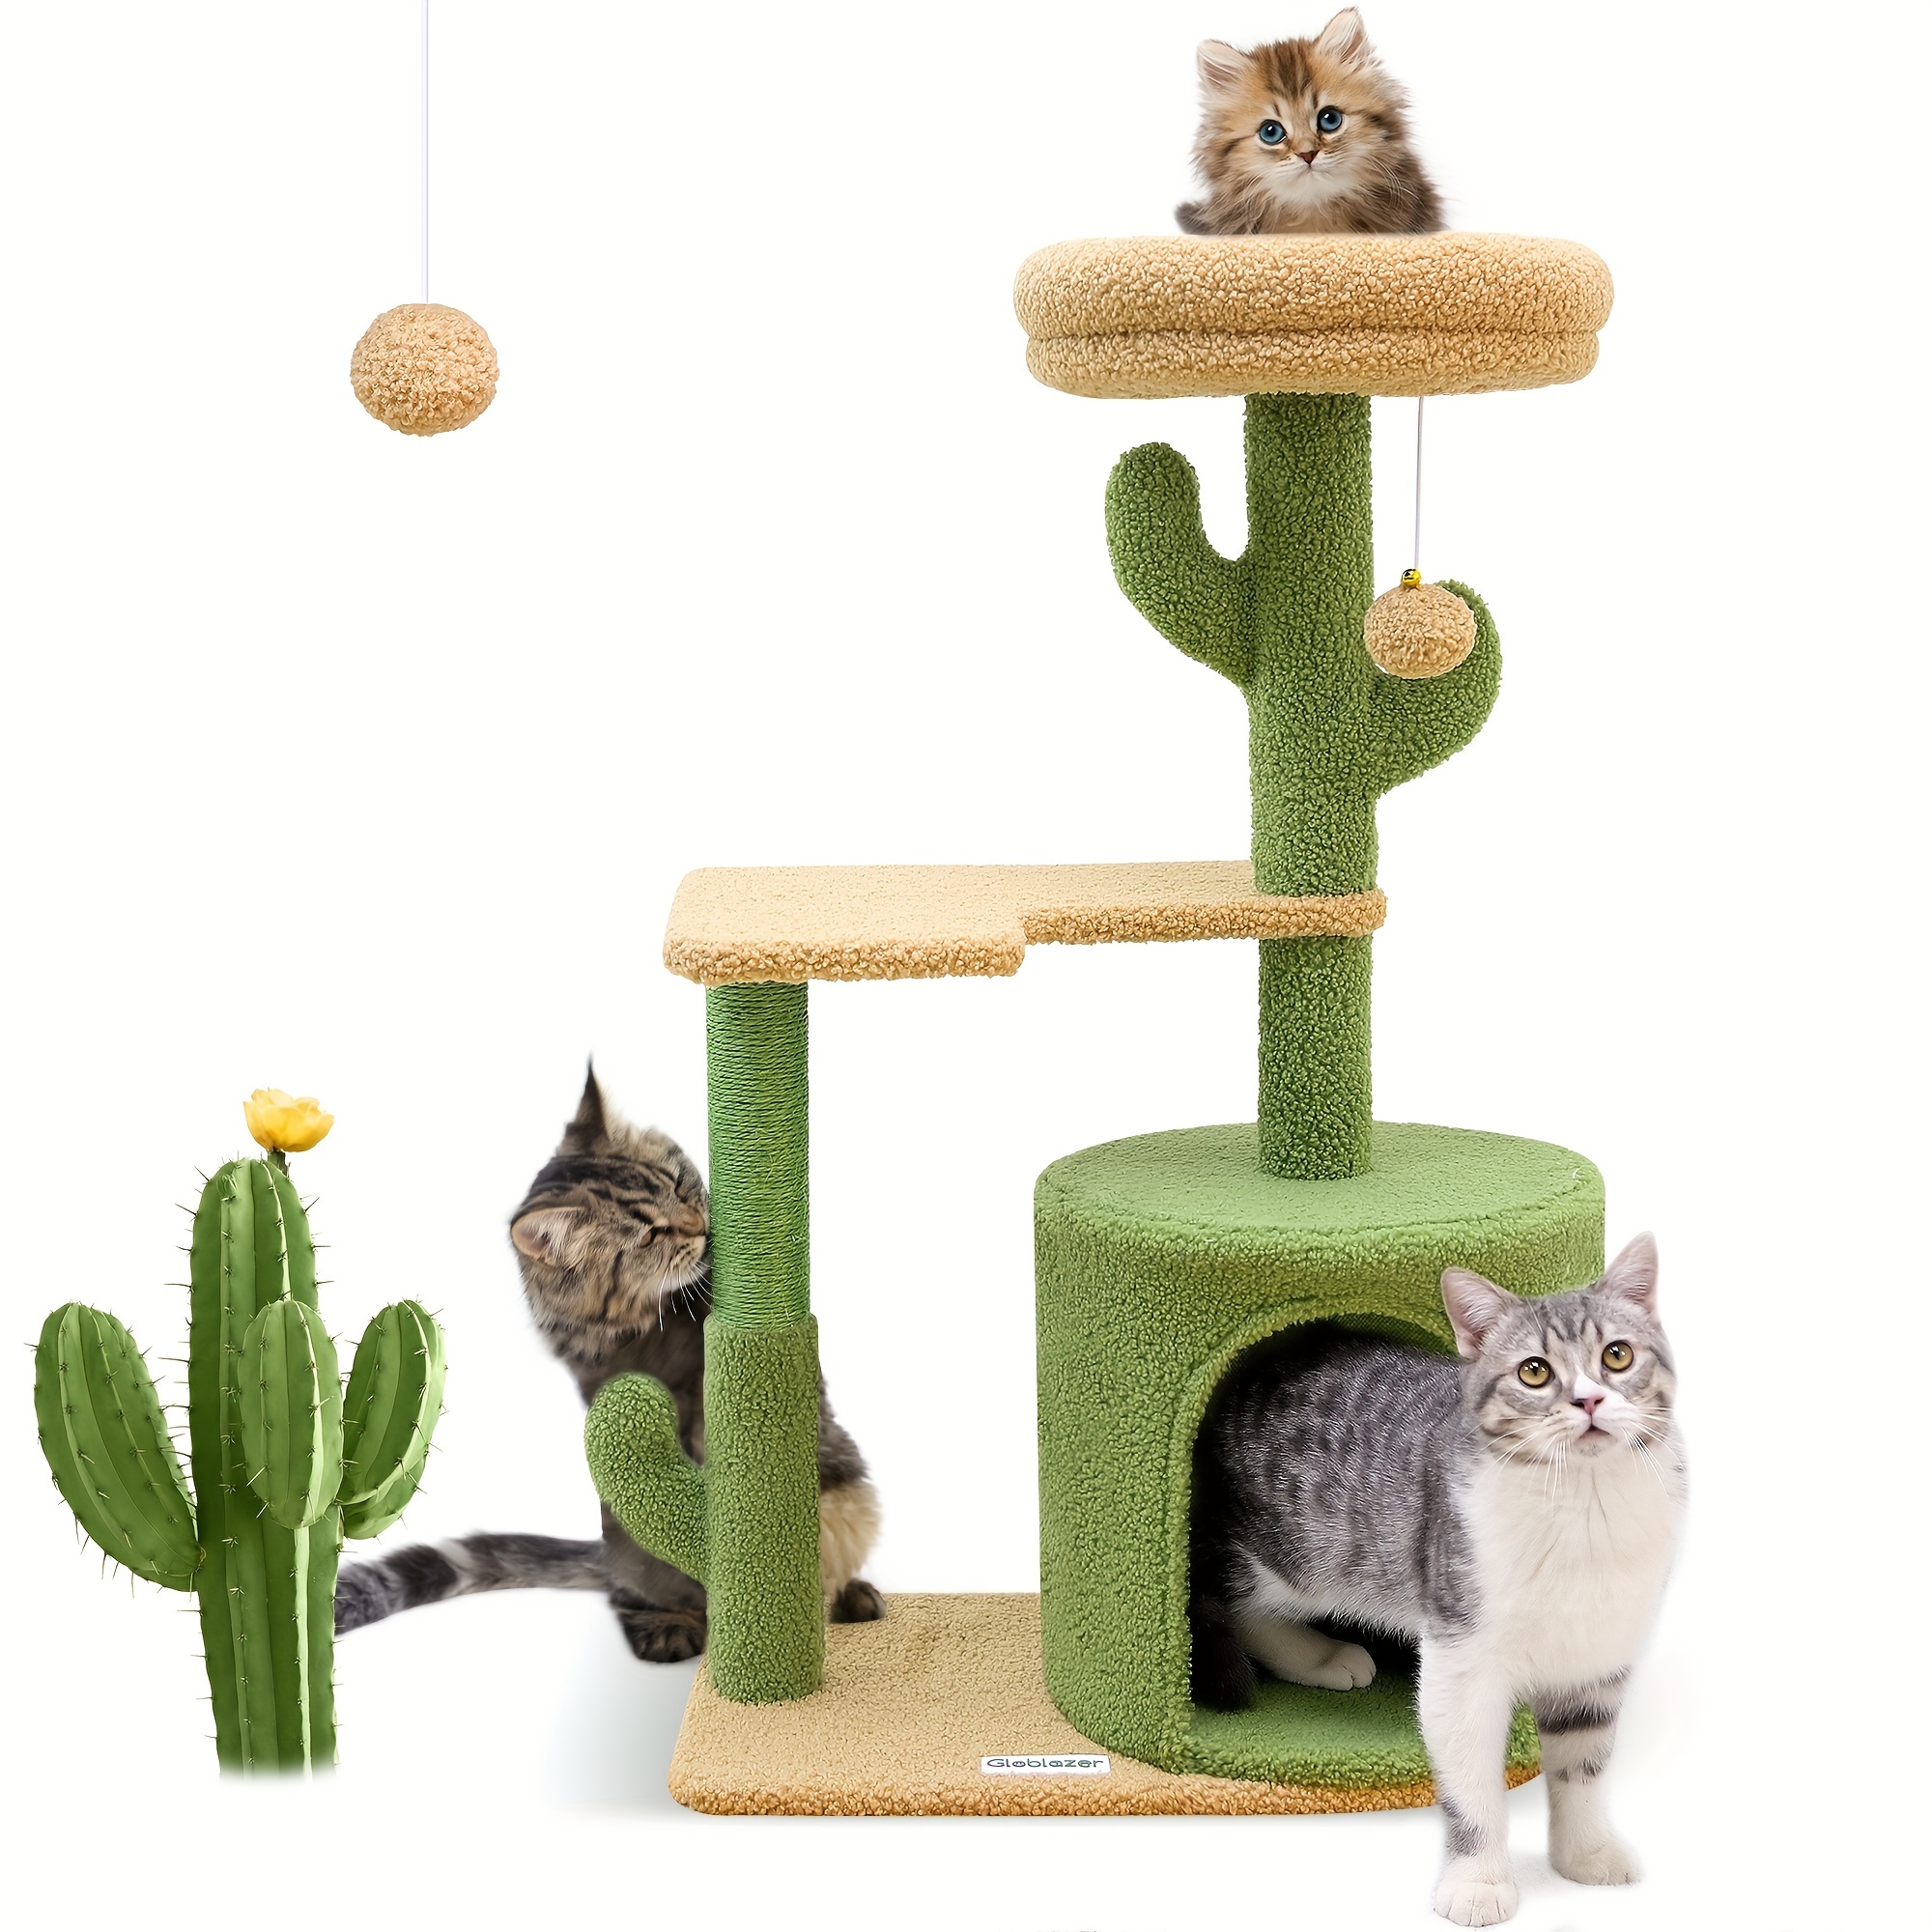 

F33 Cactus Cat Tree, 33inch Cute Kitten Cat Tower With Scratching Post, Small Cat Tree For Indoor Cats With Padded Top Perch, Cozy Condo, Large Plush Platform And Hanging Ball For Baby Cats #globlazer